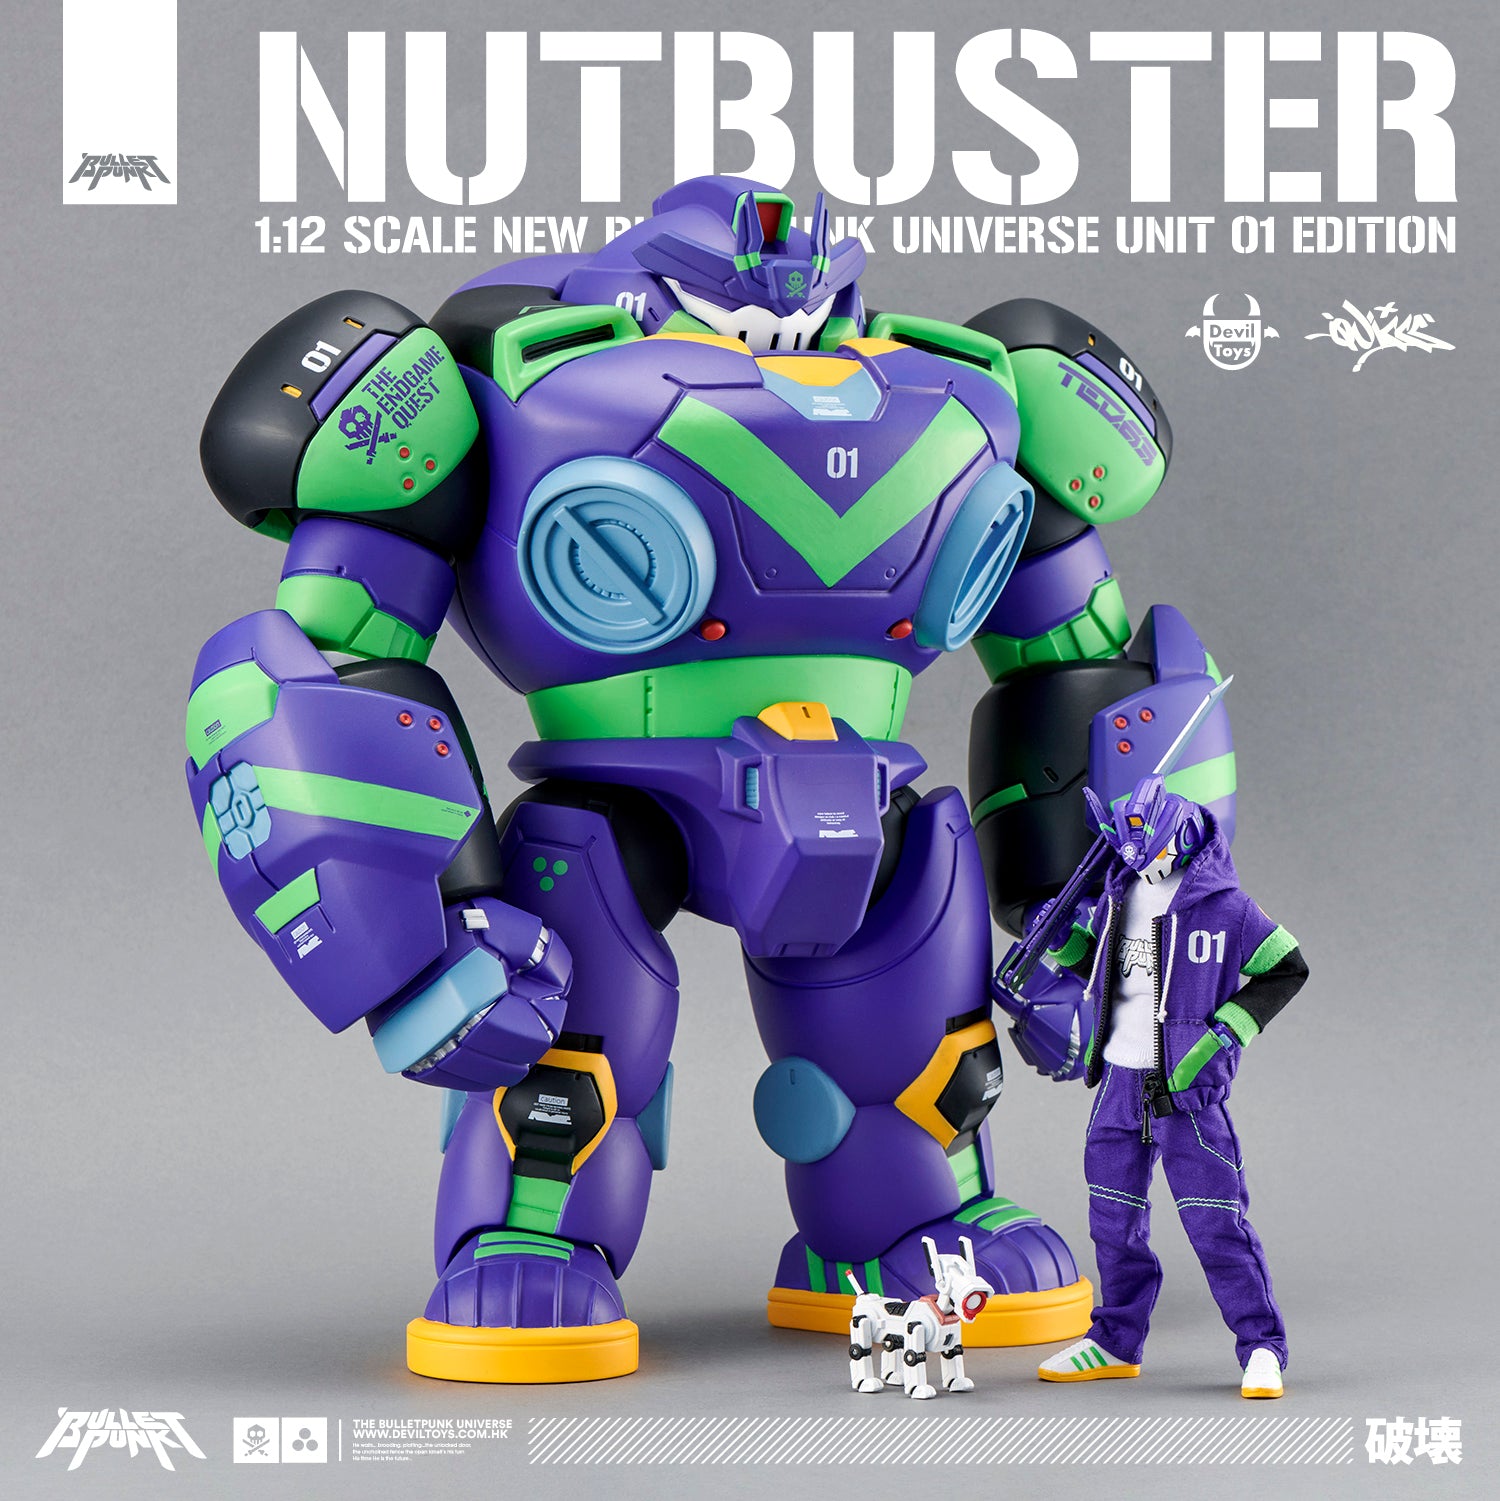 1:12 Scale NUTBUSTER + TEQ63 New "UNIT_01” Colorway Full Kit by Quiccs X Devil Toys